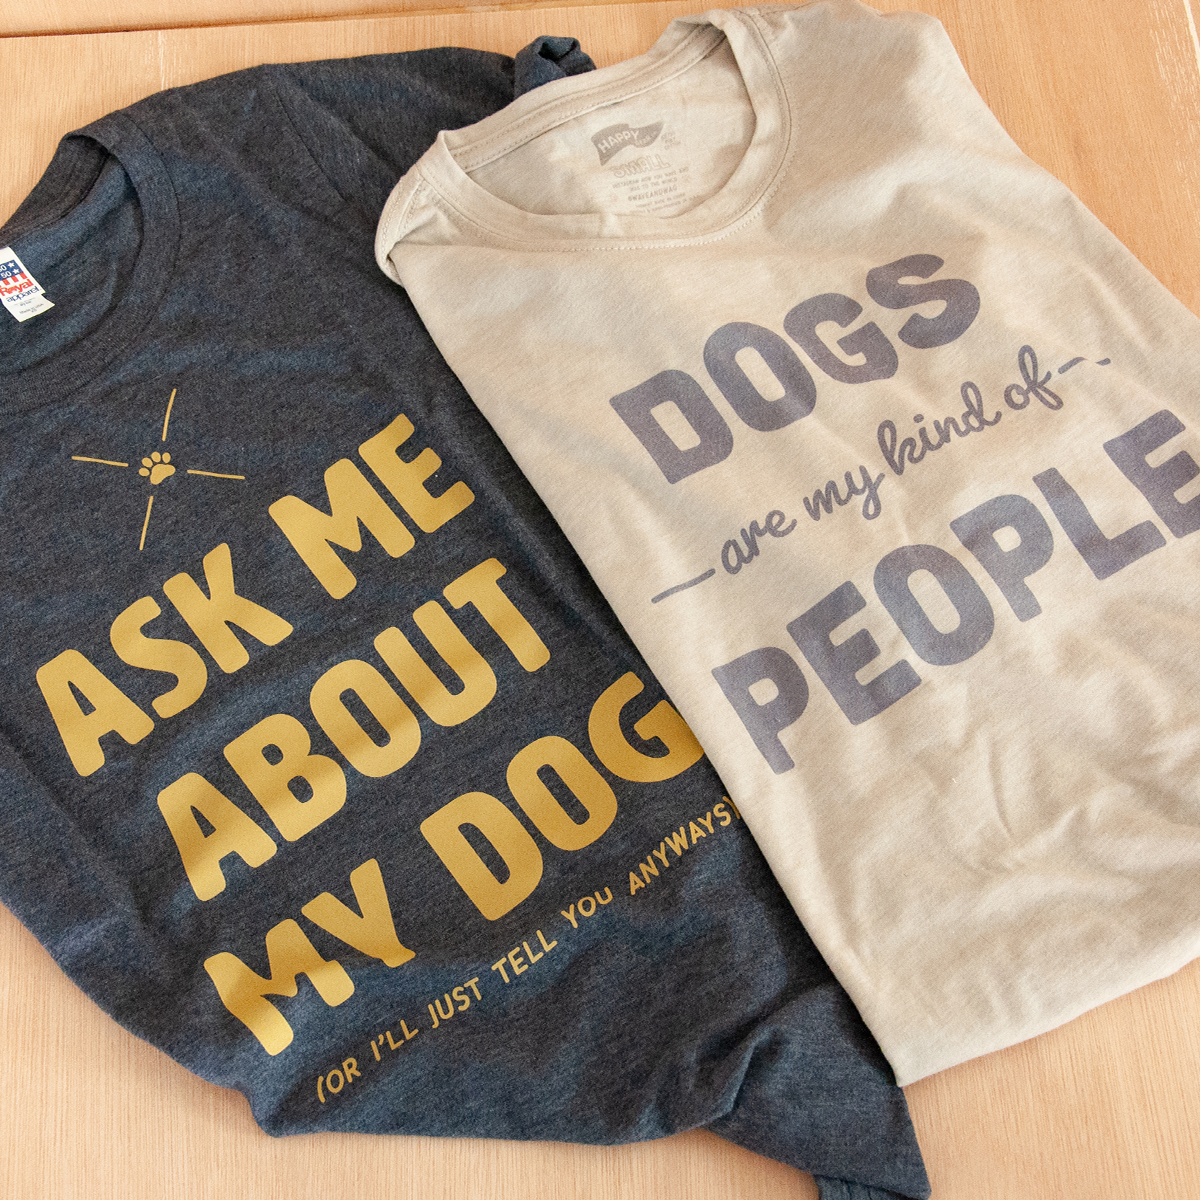 dog themed t shirts for human lay side by side, one reads Ask Me About My Dog or I'll just tell you anyways, the second says Dogs are my kind of people